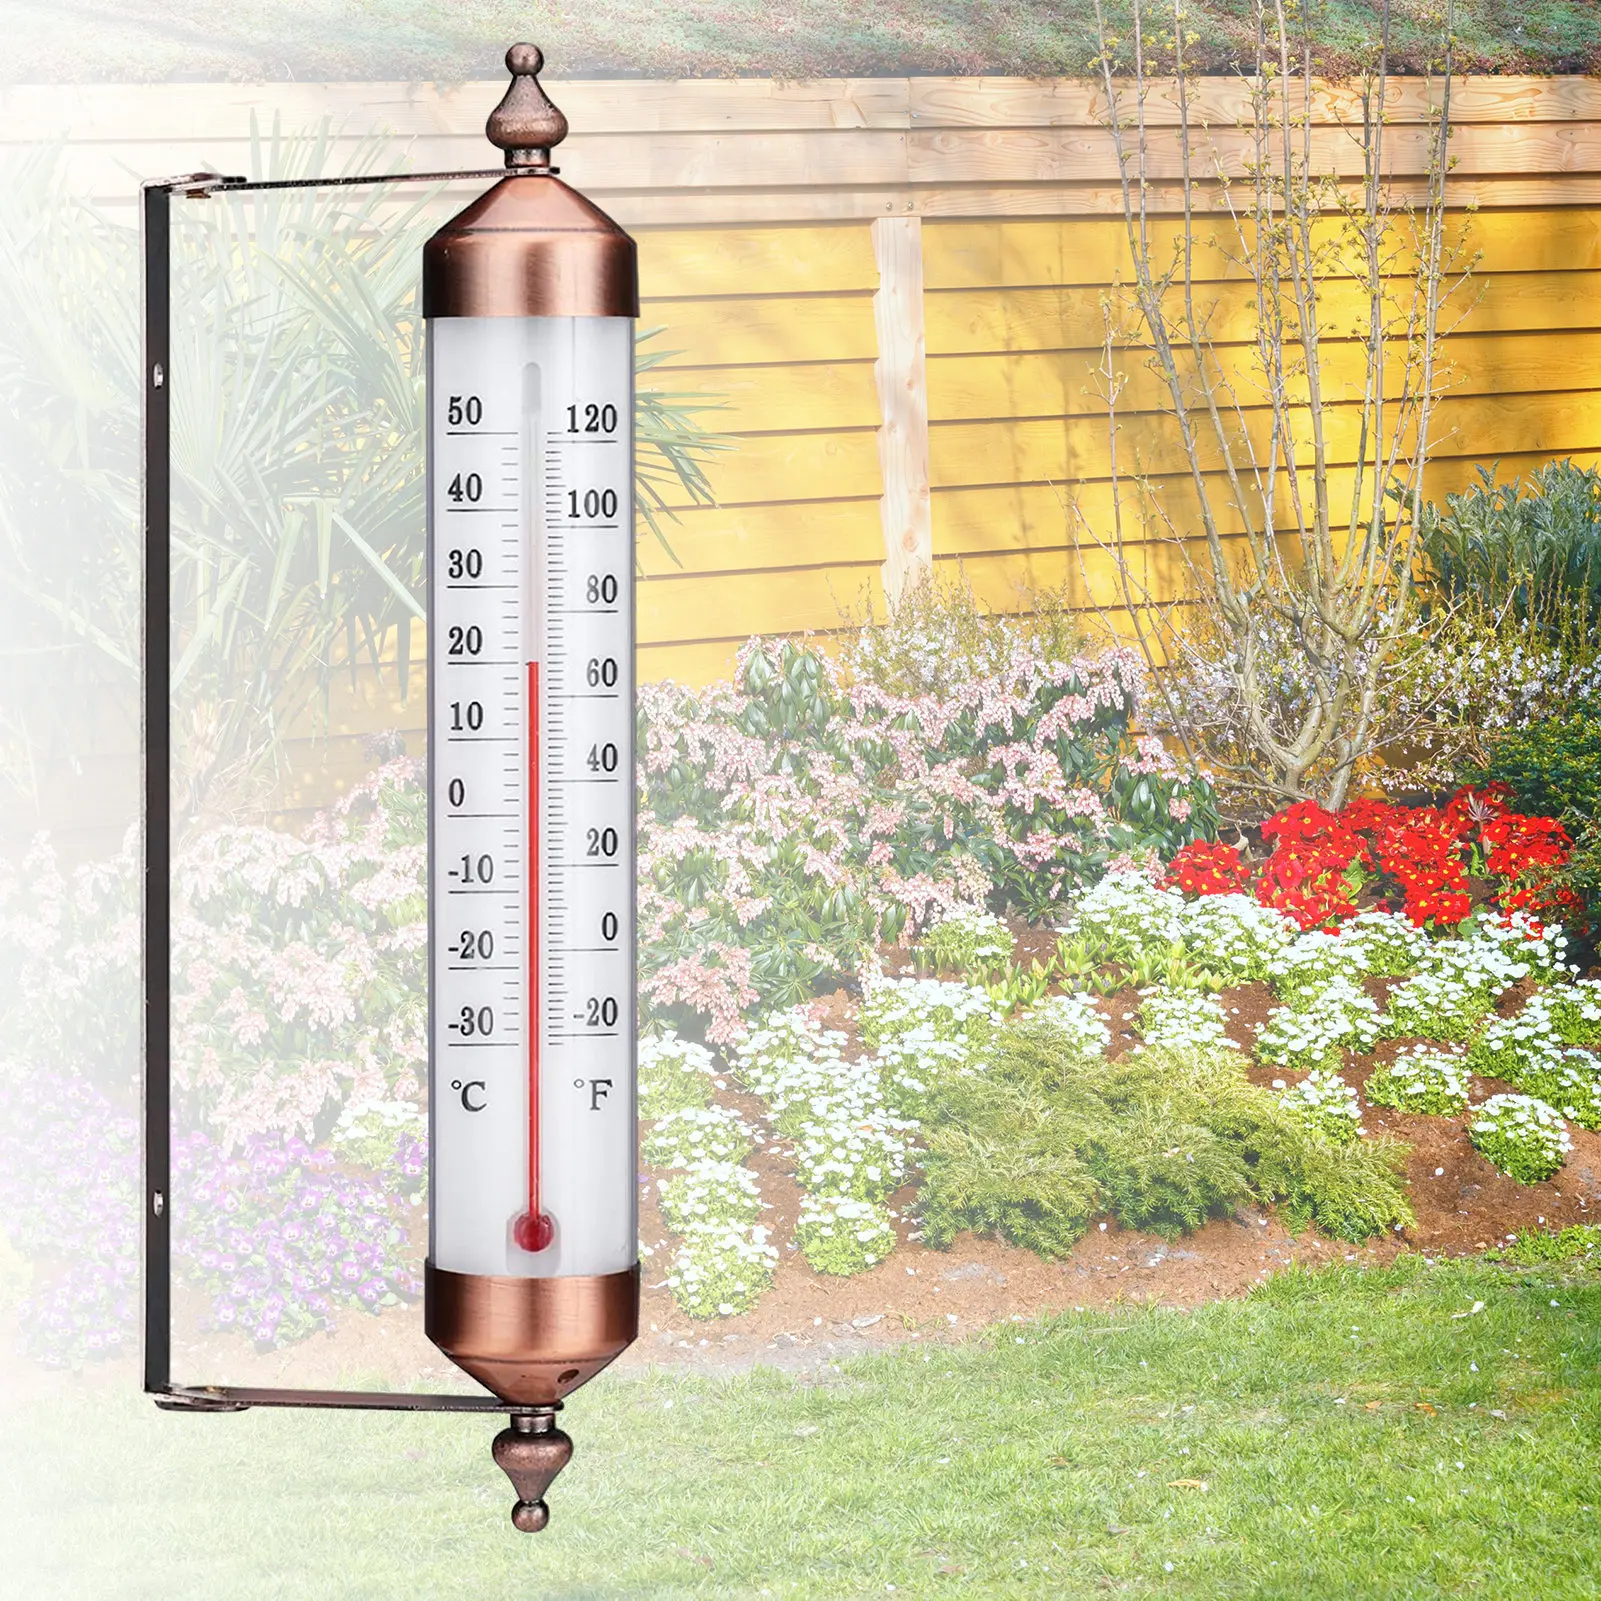 https://ae01.alicdn.com/kf/S319344d2dd8a430a8d57b21f90ef6404t/Wall-Thermometer-10-Indoor-Outdoor-Thermometer-Decorative-Large-Outdoor-Thermometers-For-Patio-Garden-Greenhouse-No-Battery.jpg